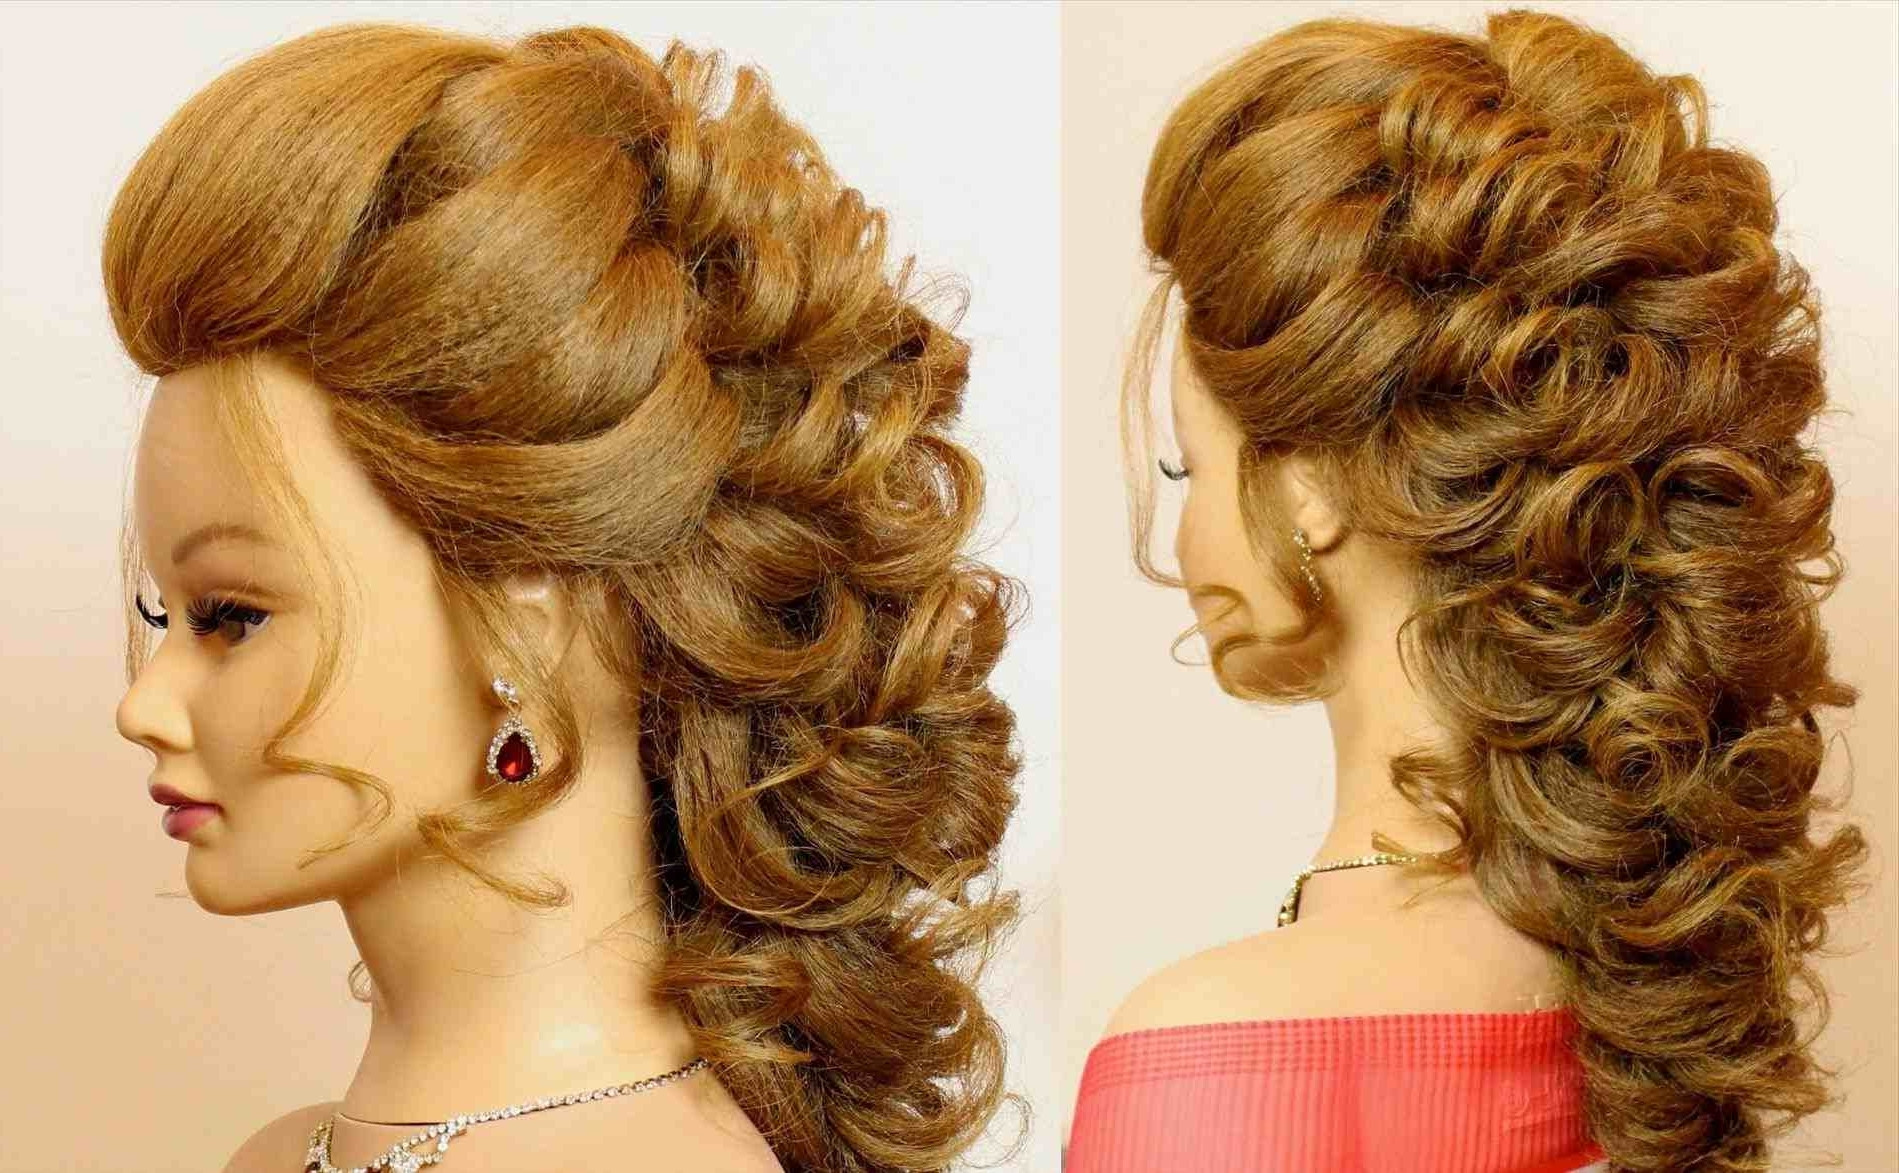 Arabic Wedding Hairstyles
 15 Inspirations of Arabic Wedding Hairstyles